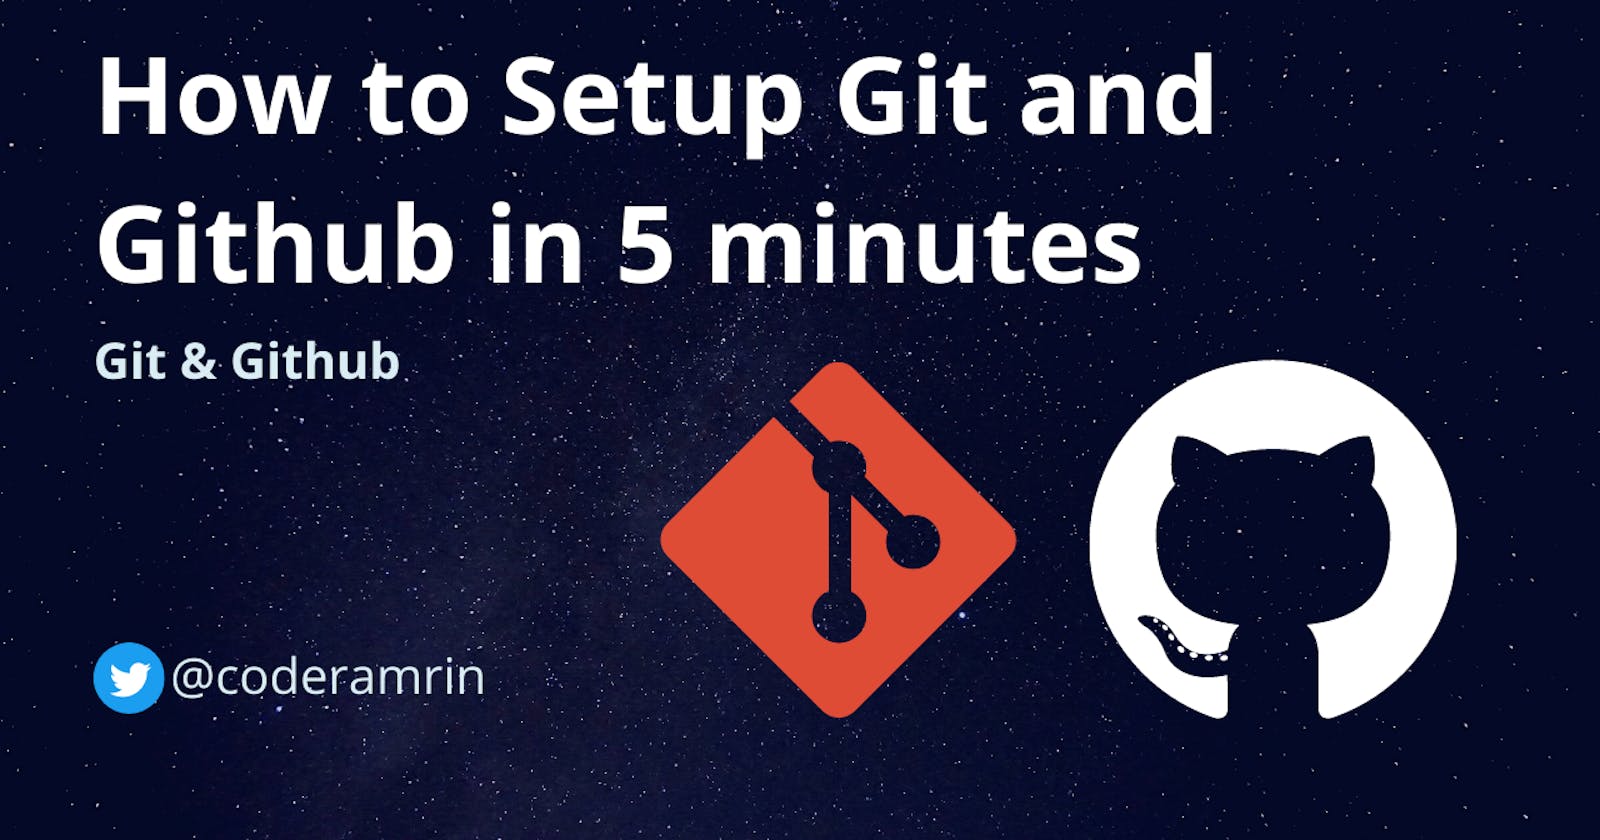 How to Setup Git and Github in less than 5 minutes